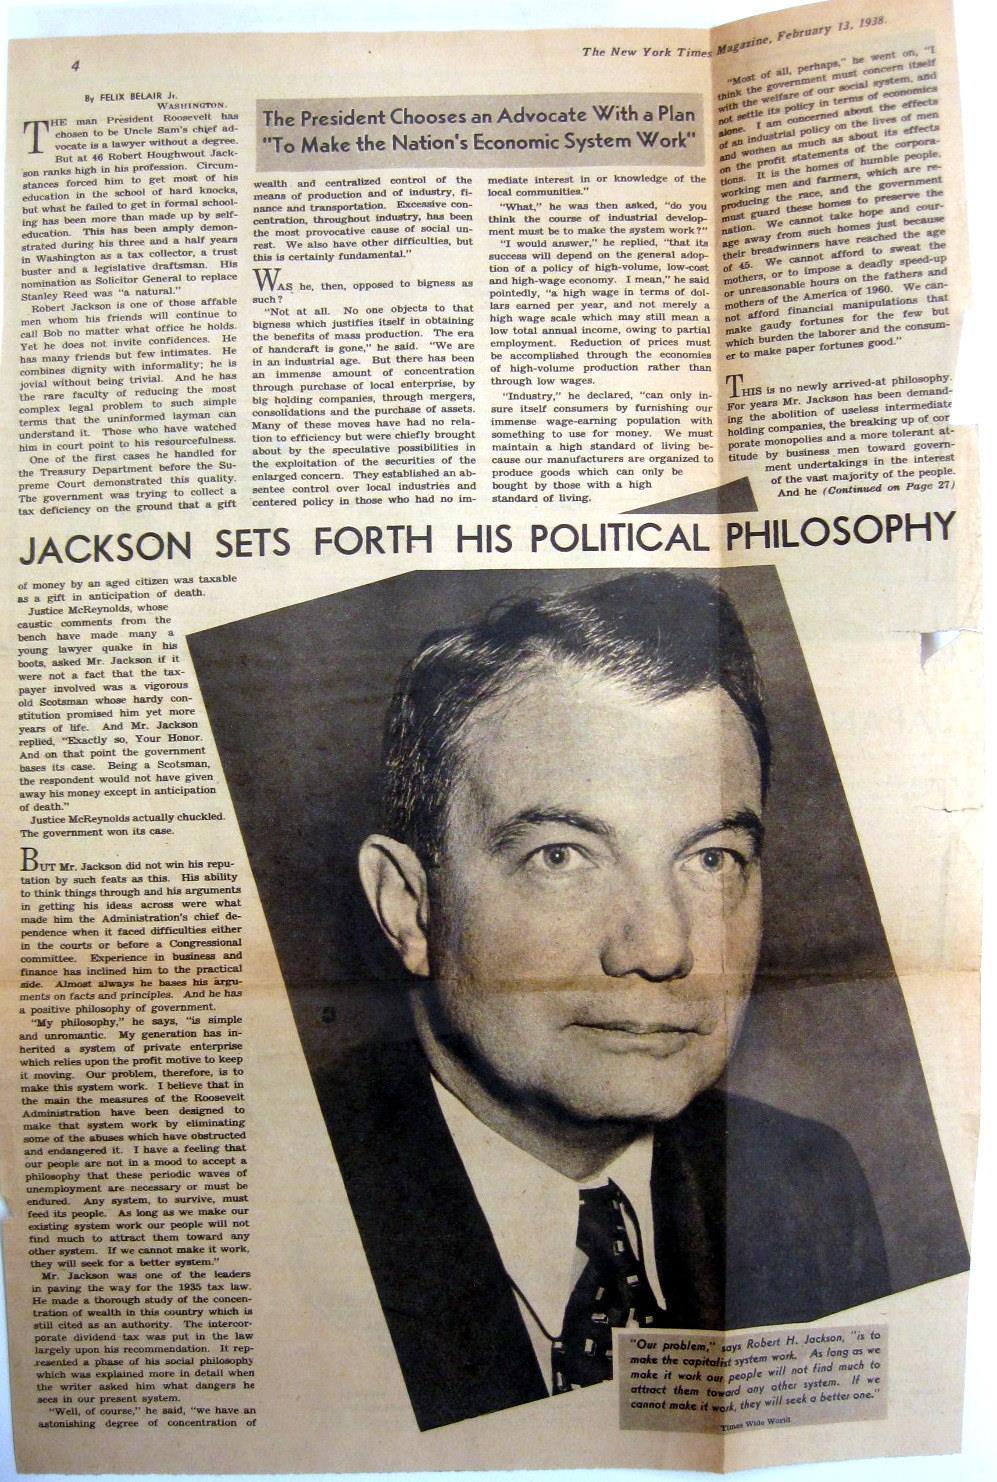 The writer, Felix J. Belair, Jr., was The Times s chief White House correspondent. Belair had interviewed Jackson for the article it contains extensive quotations from him, plus two photographs.